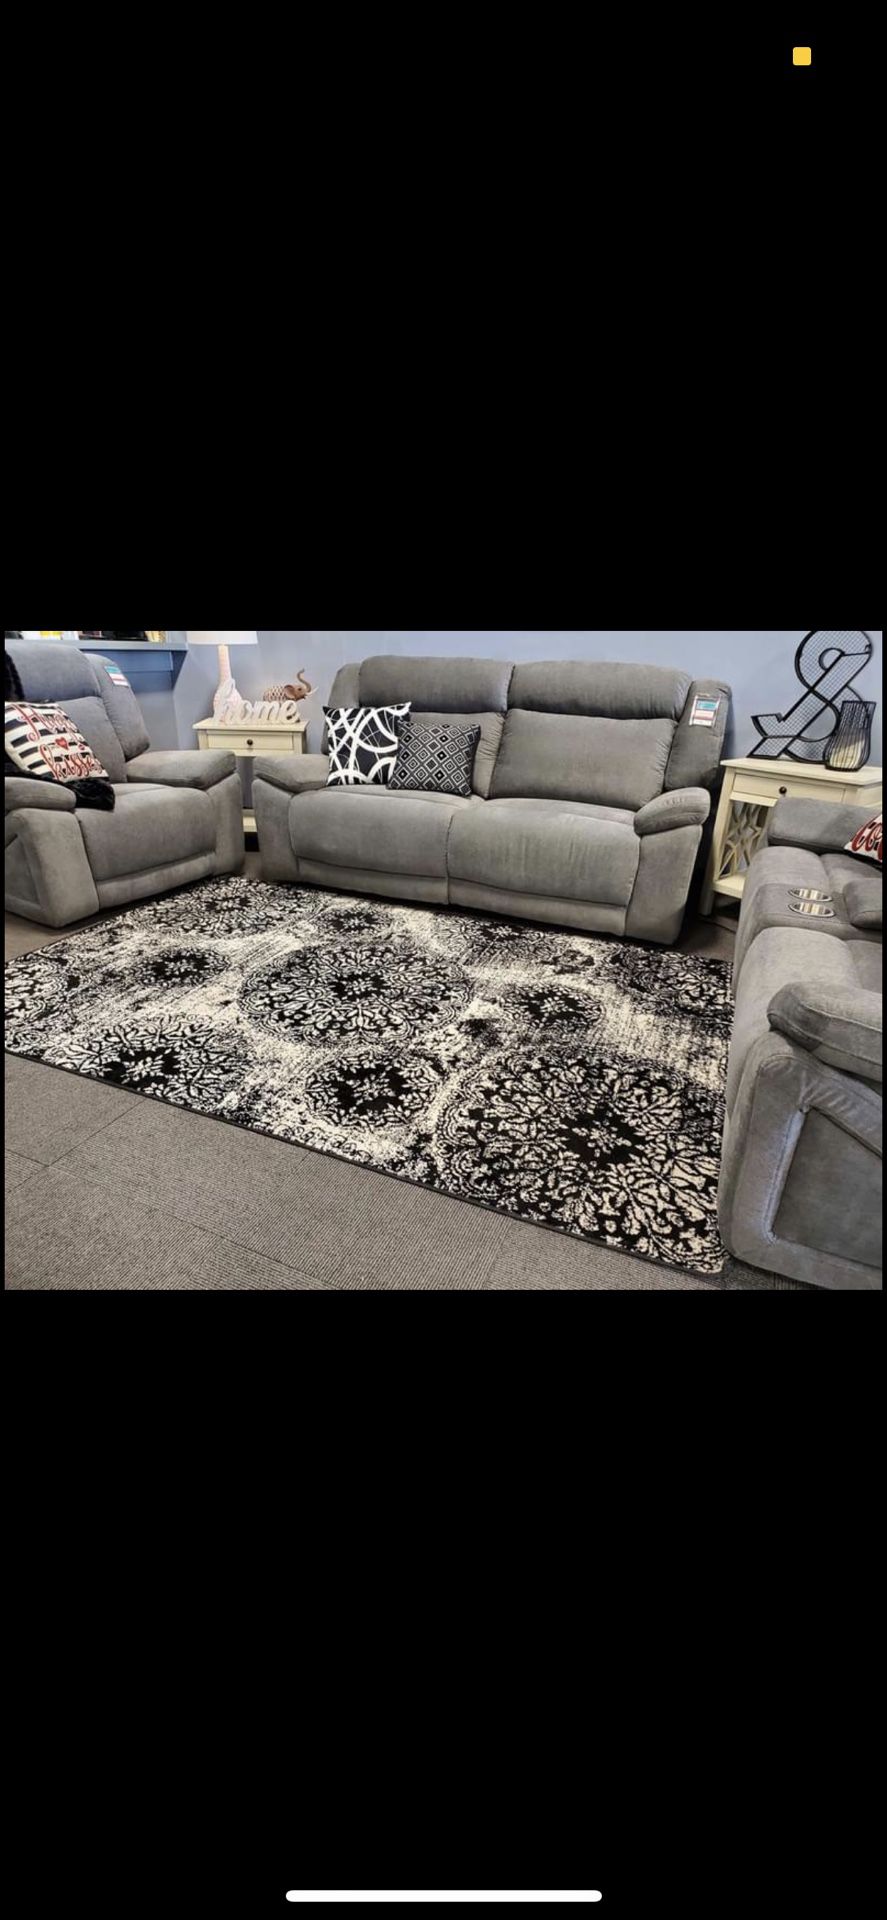 Power reclining sofa/loveseat/Recliner with YSB and adjustable headrests-buy together or separately